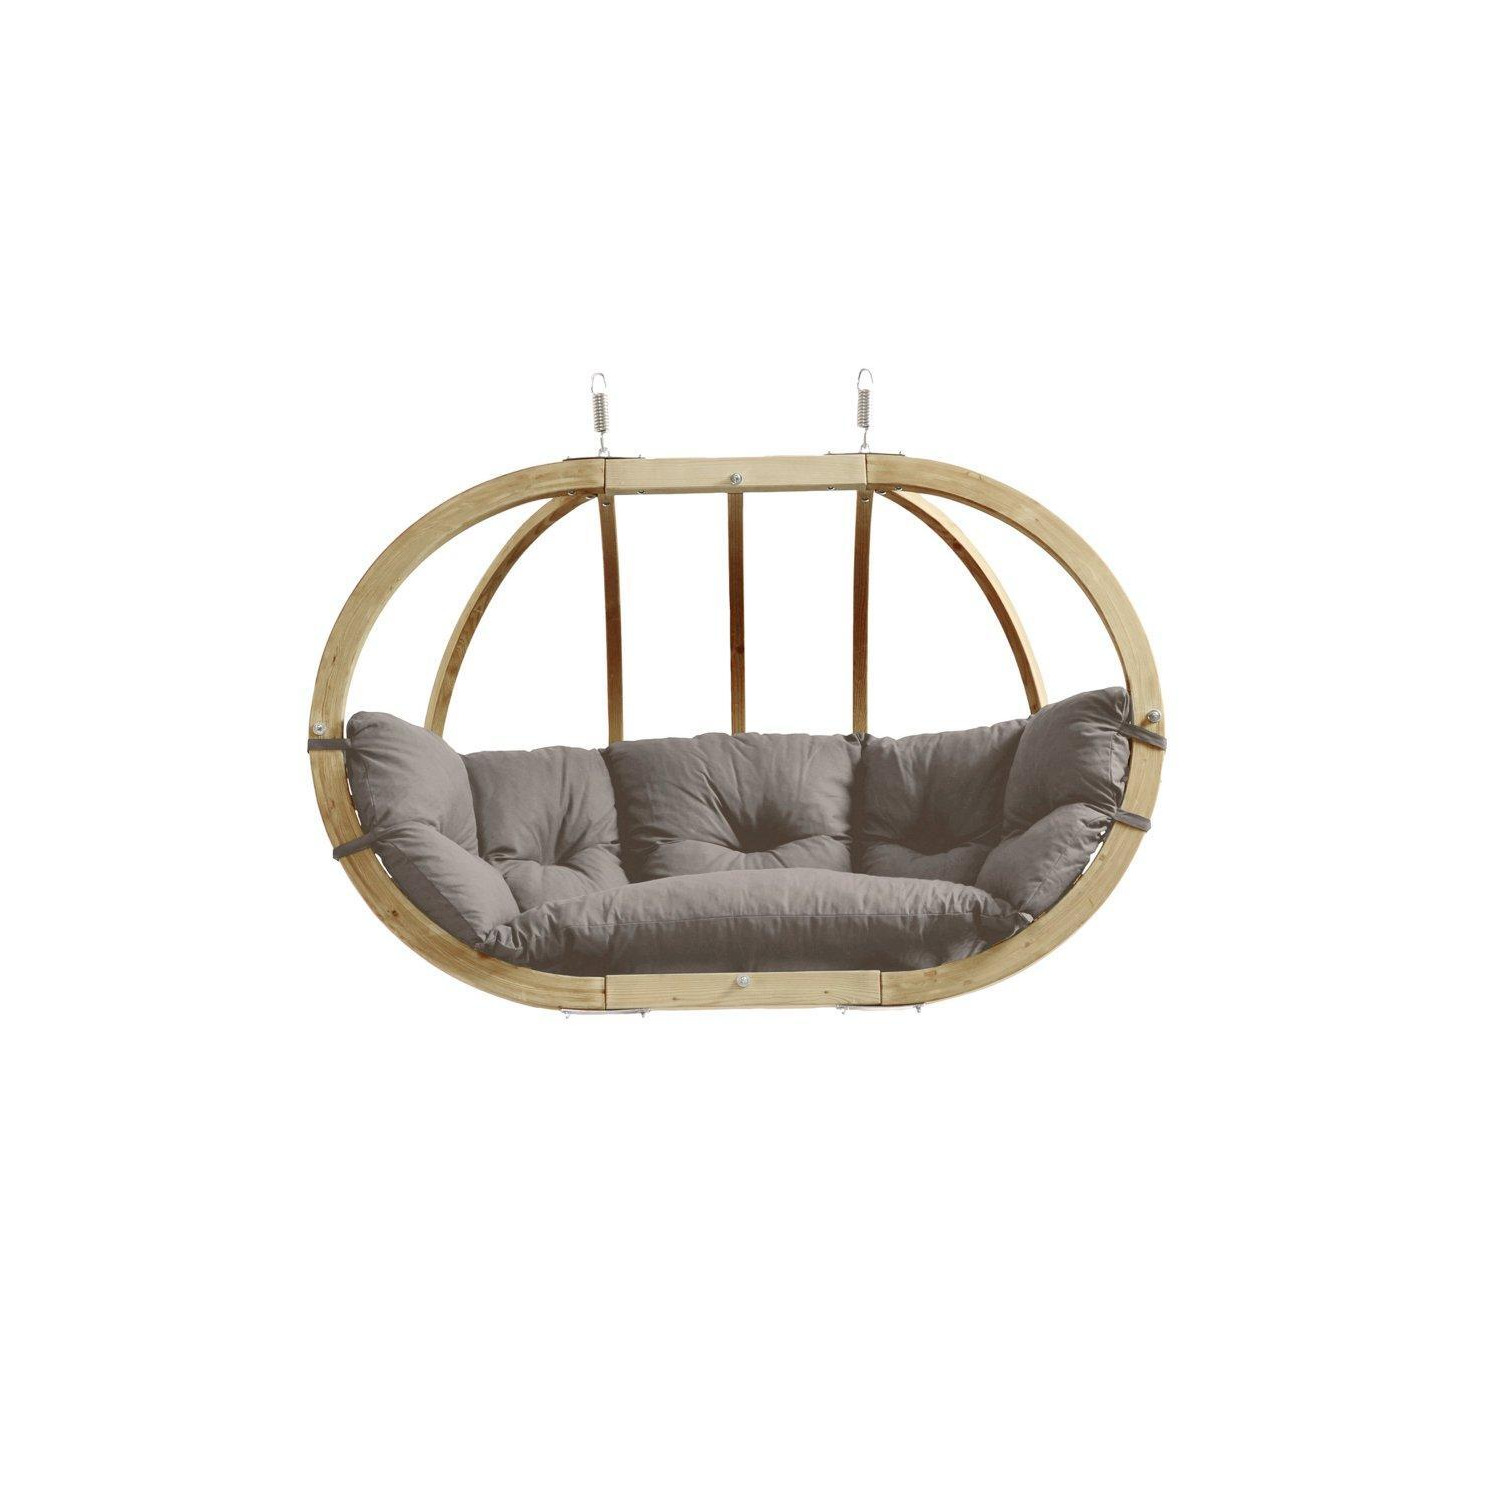 Globo Double Royal Wooden Cushion Egg Hanging Chair - Taupe - image 1